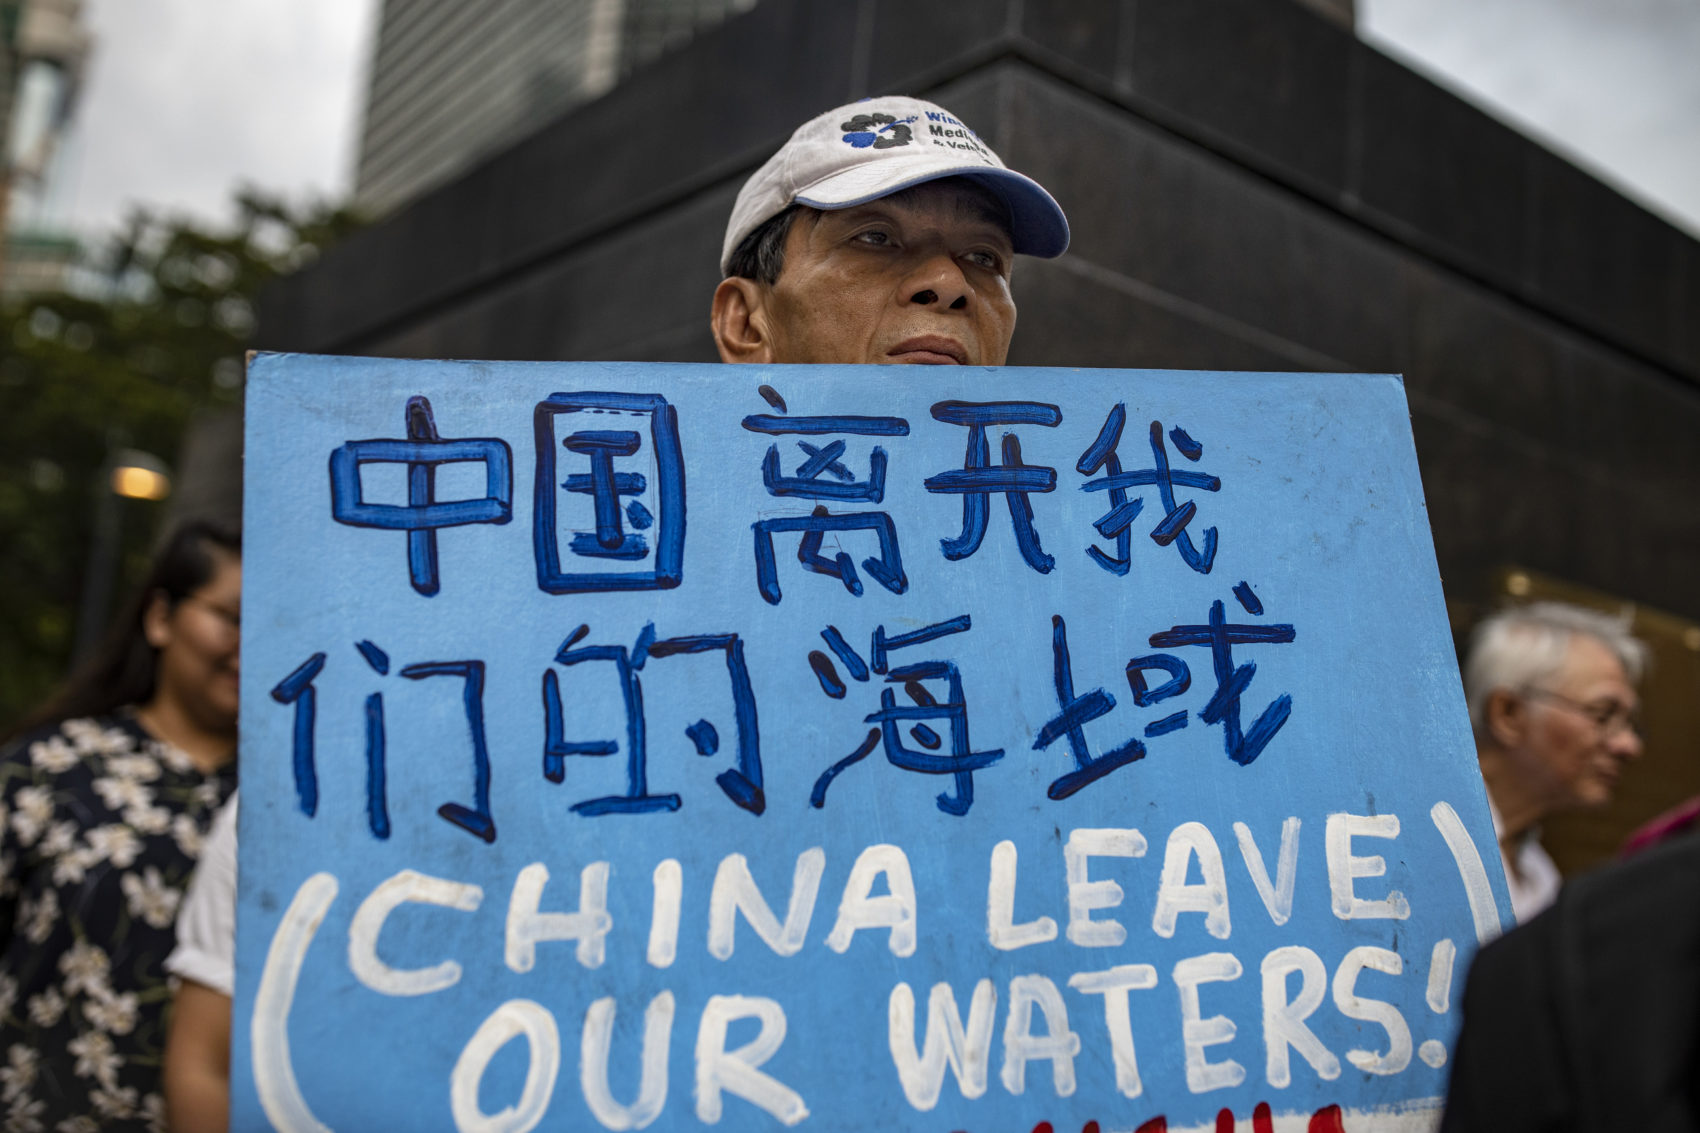 Filipinos take part in a protest condemning China's incursion at the West Philippine Sea in Makati, metro Manila, Philippines. (Ezra Acayan/Getty Images)